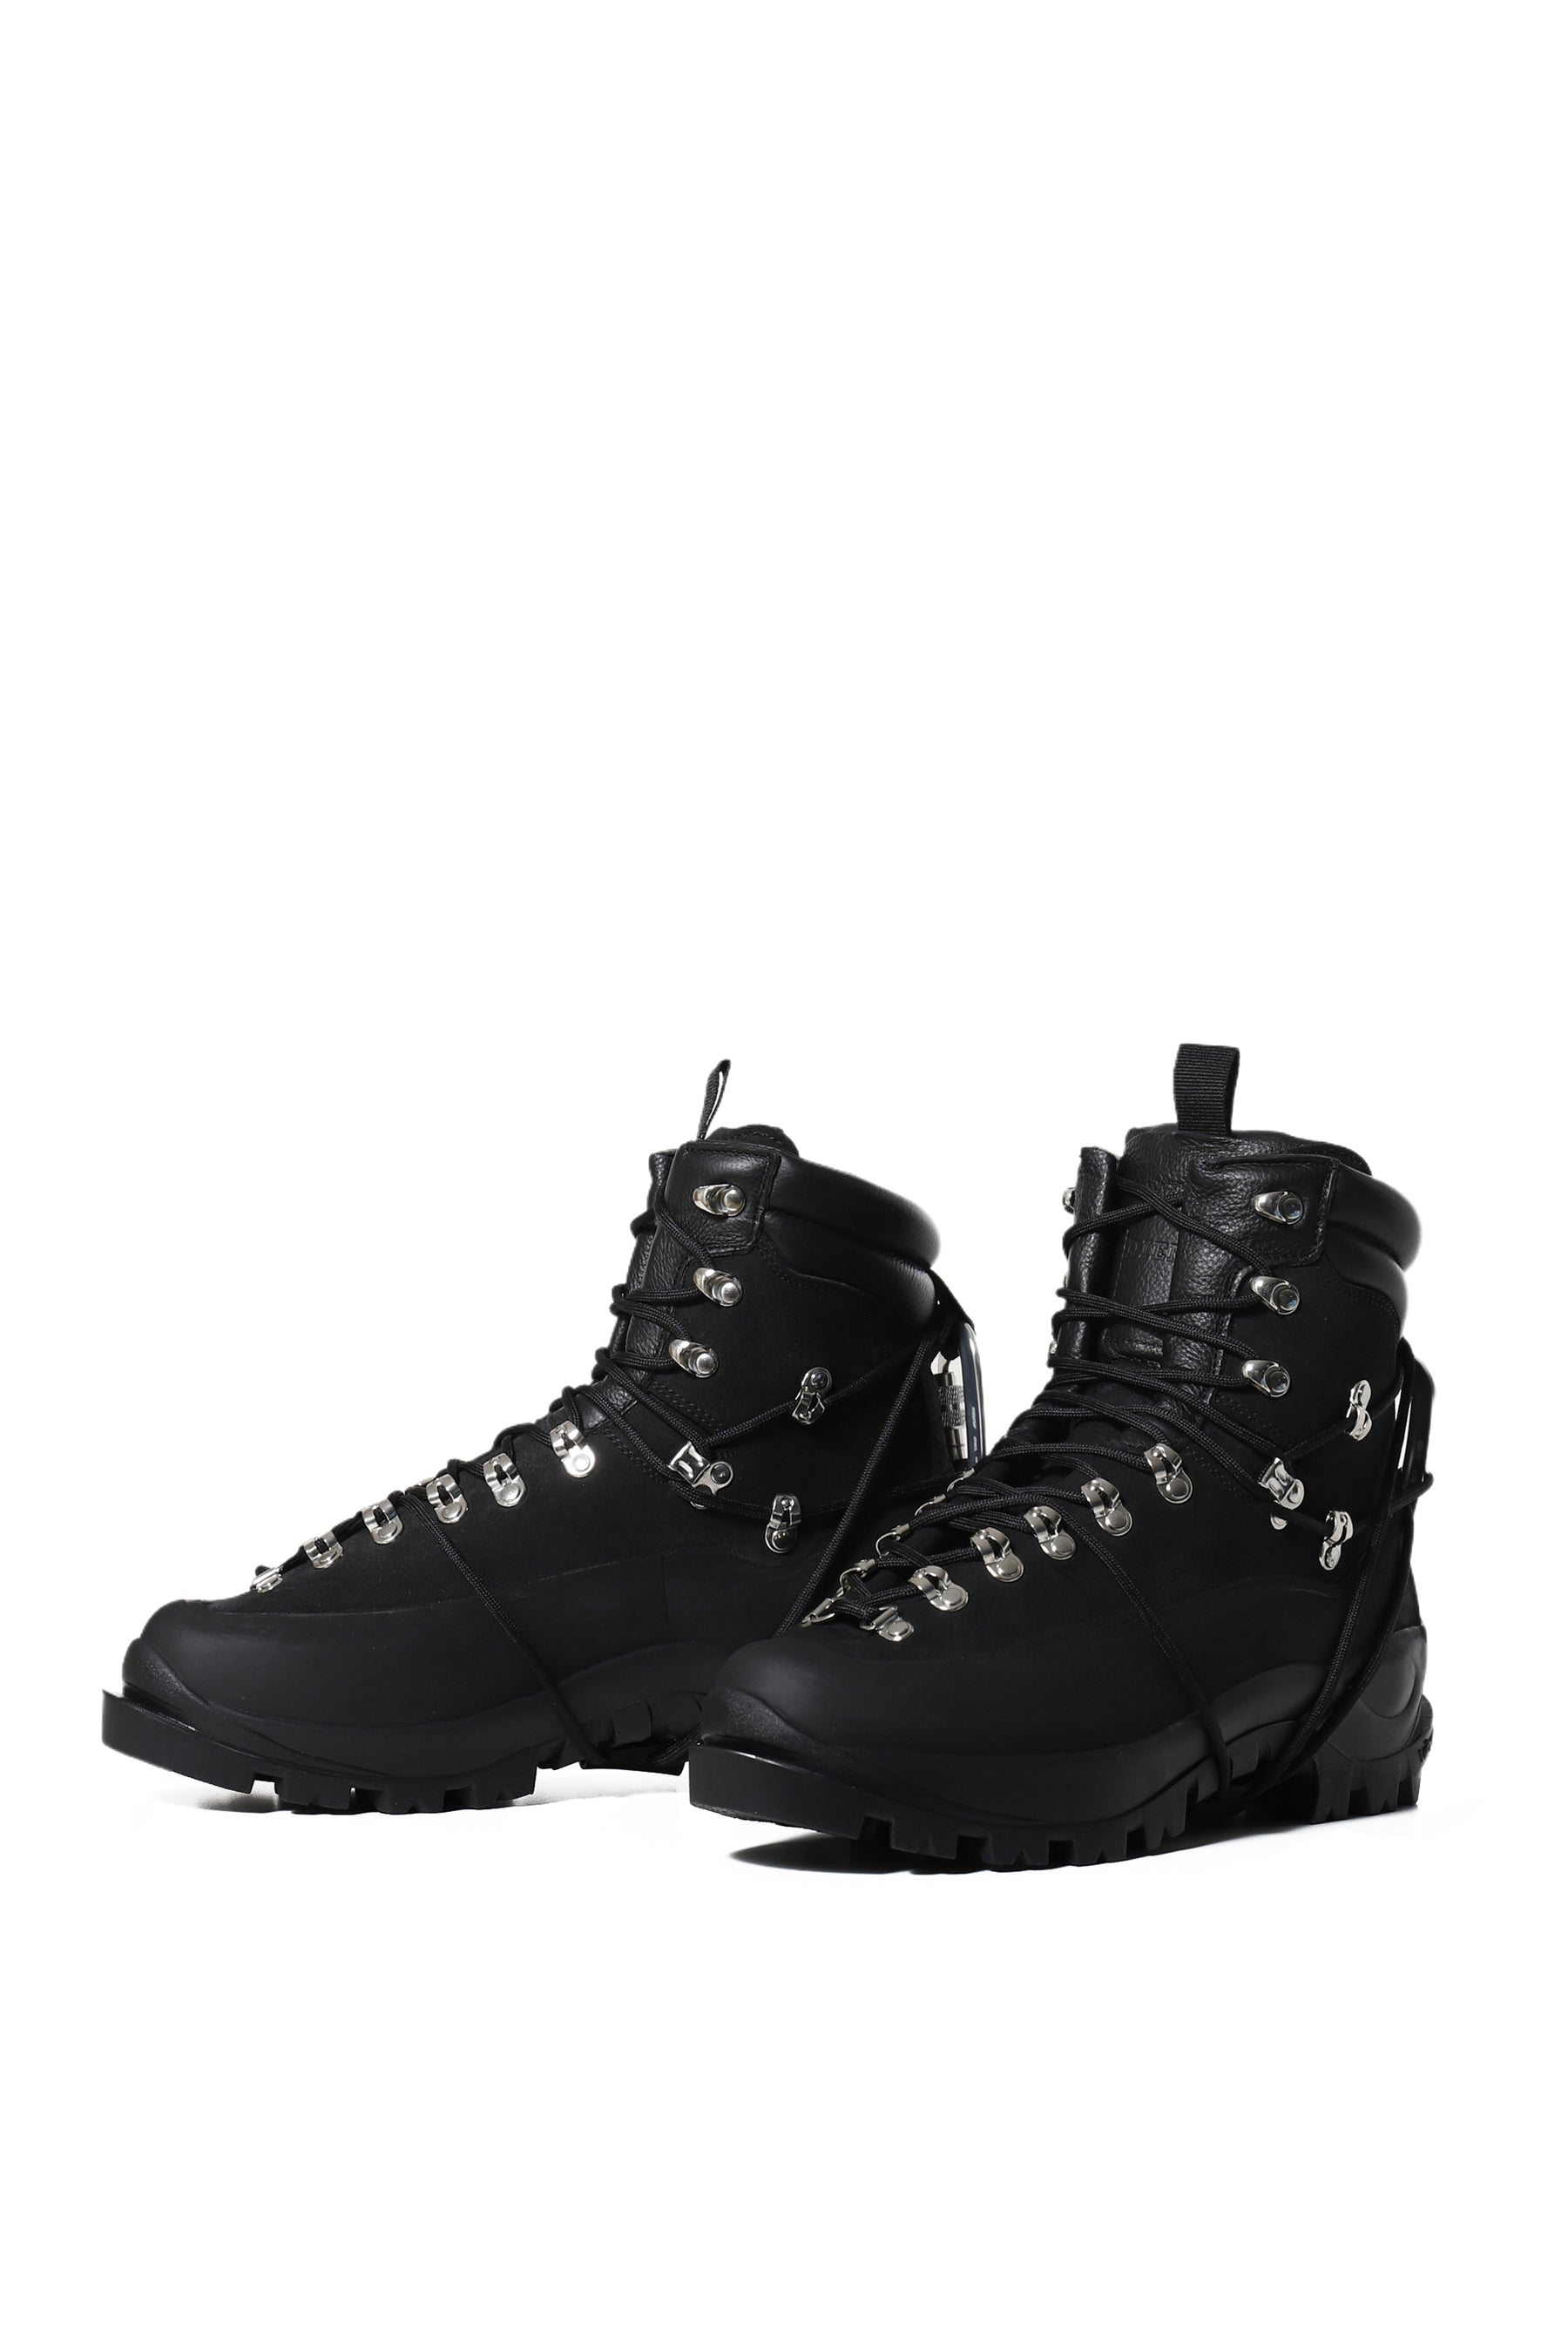 HIKING BOOTS / BLK